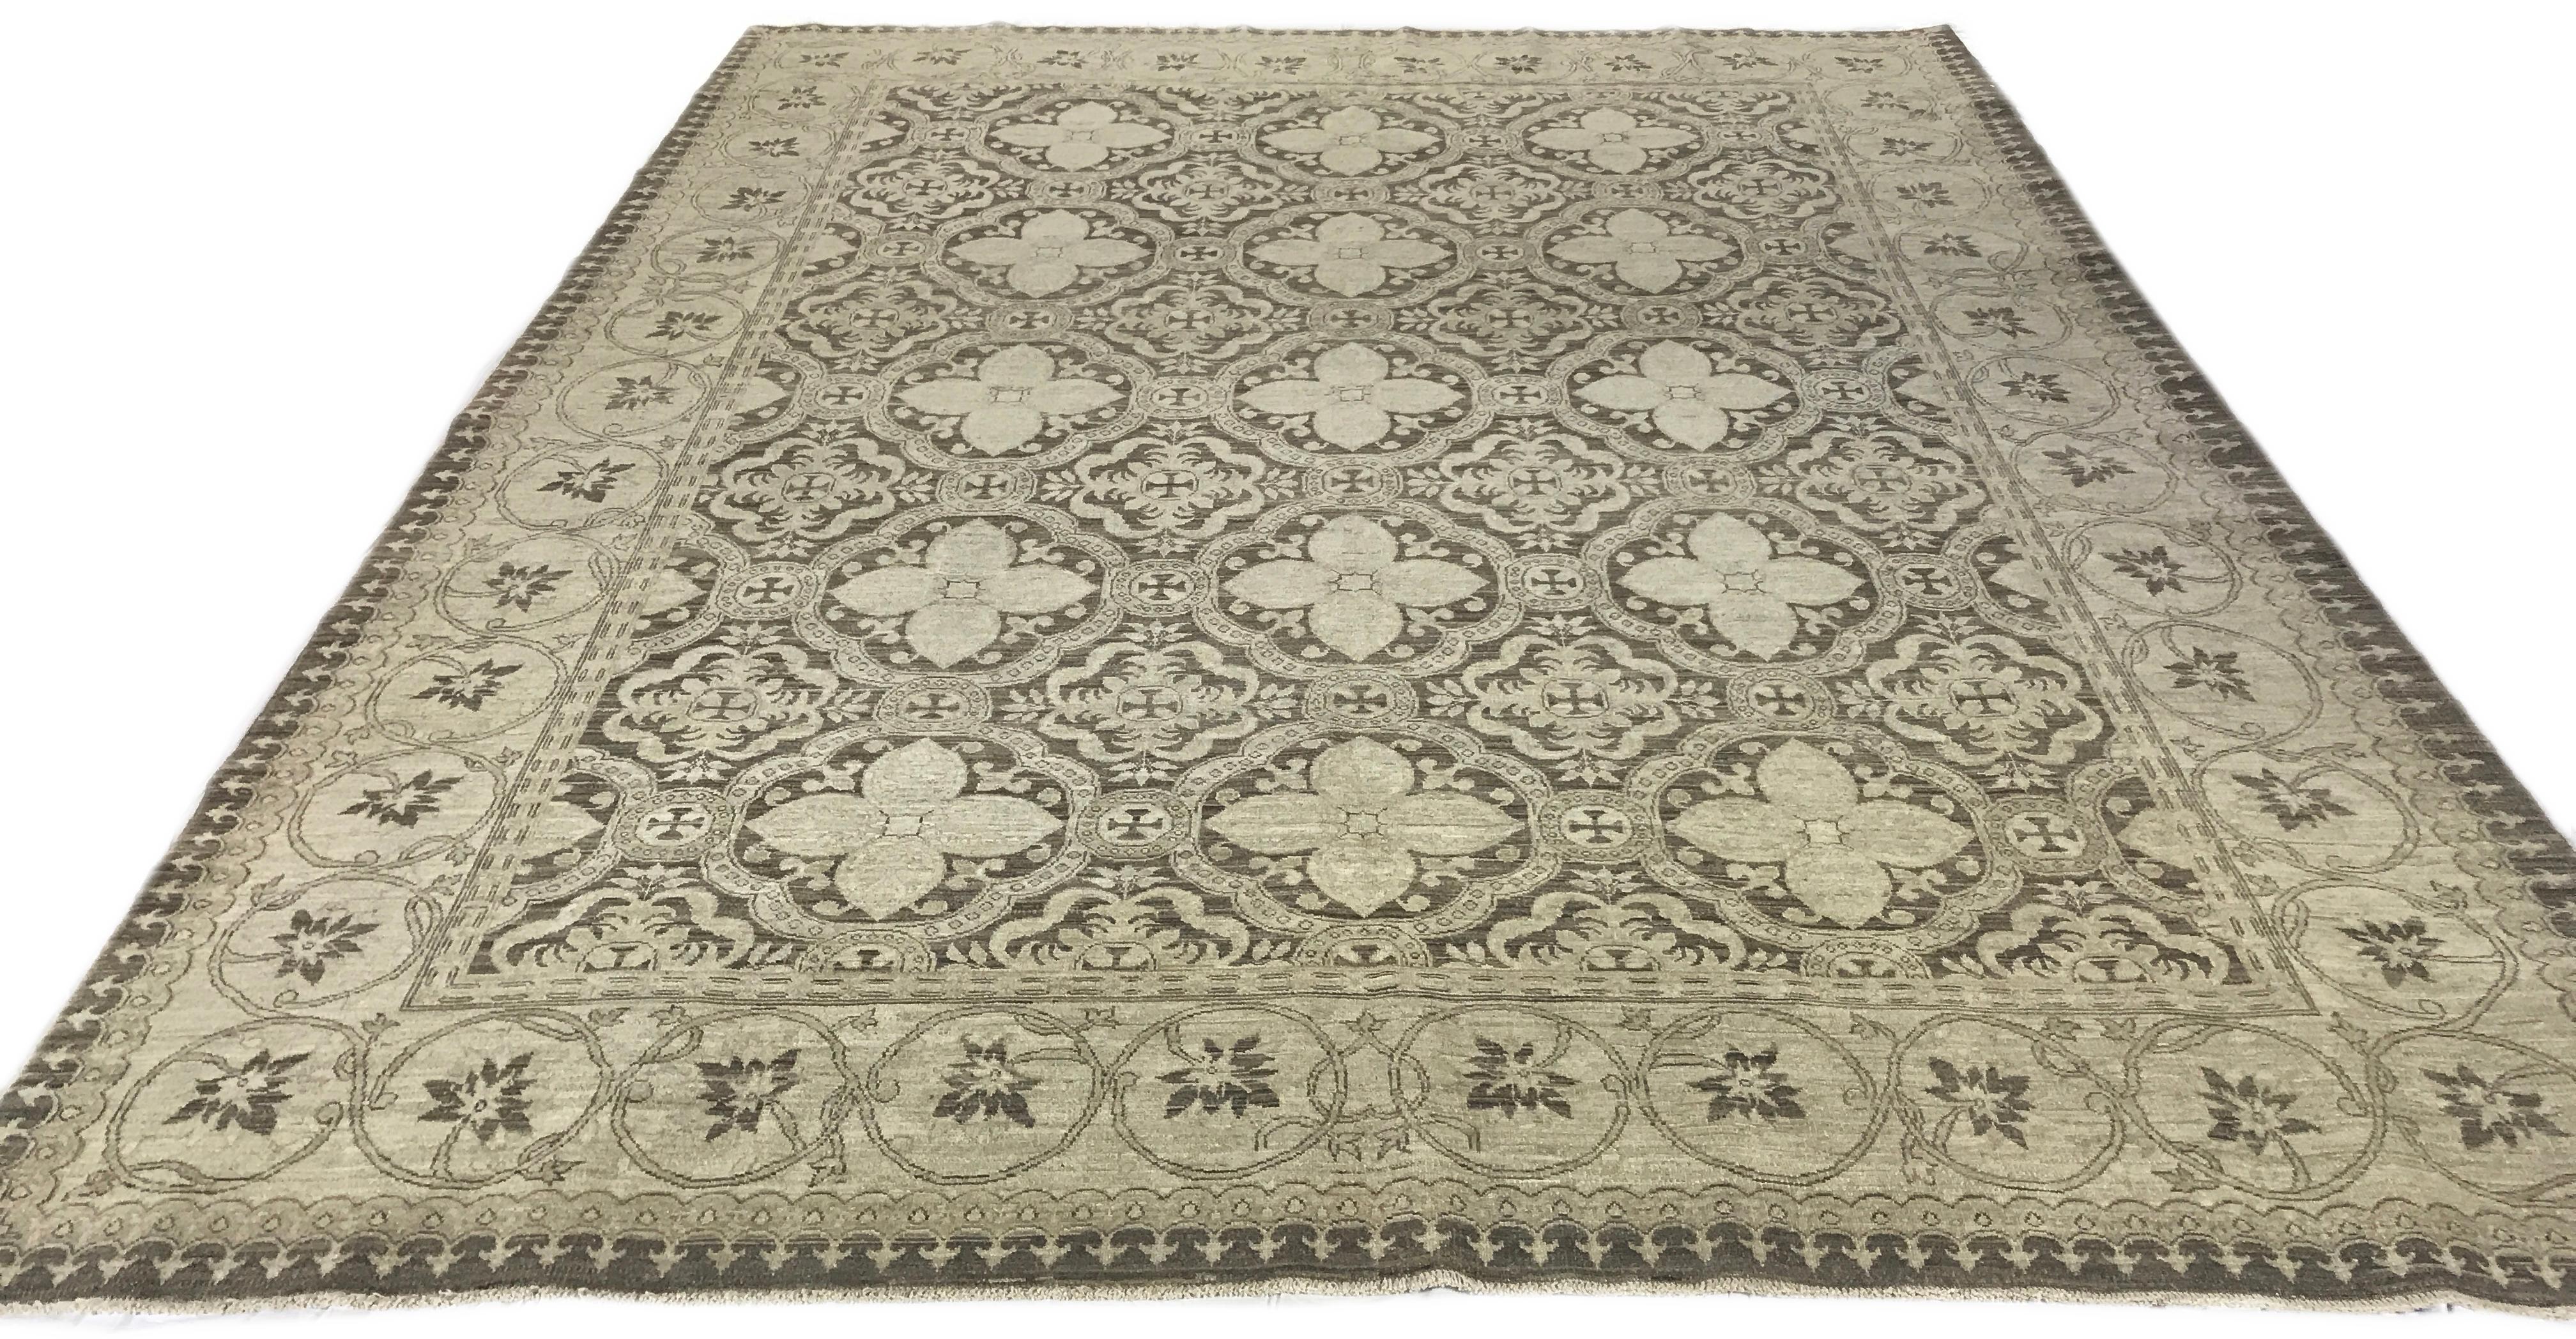 Brown and beige traditional hand knotted wool rug, 8'3